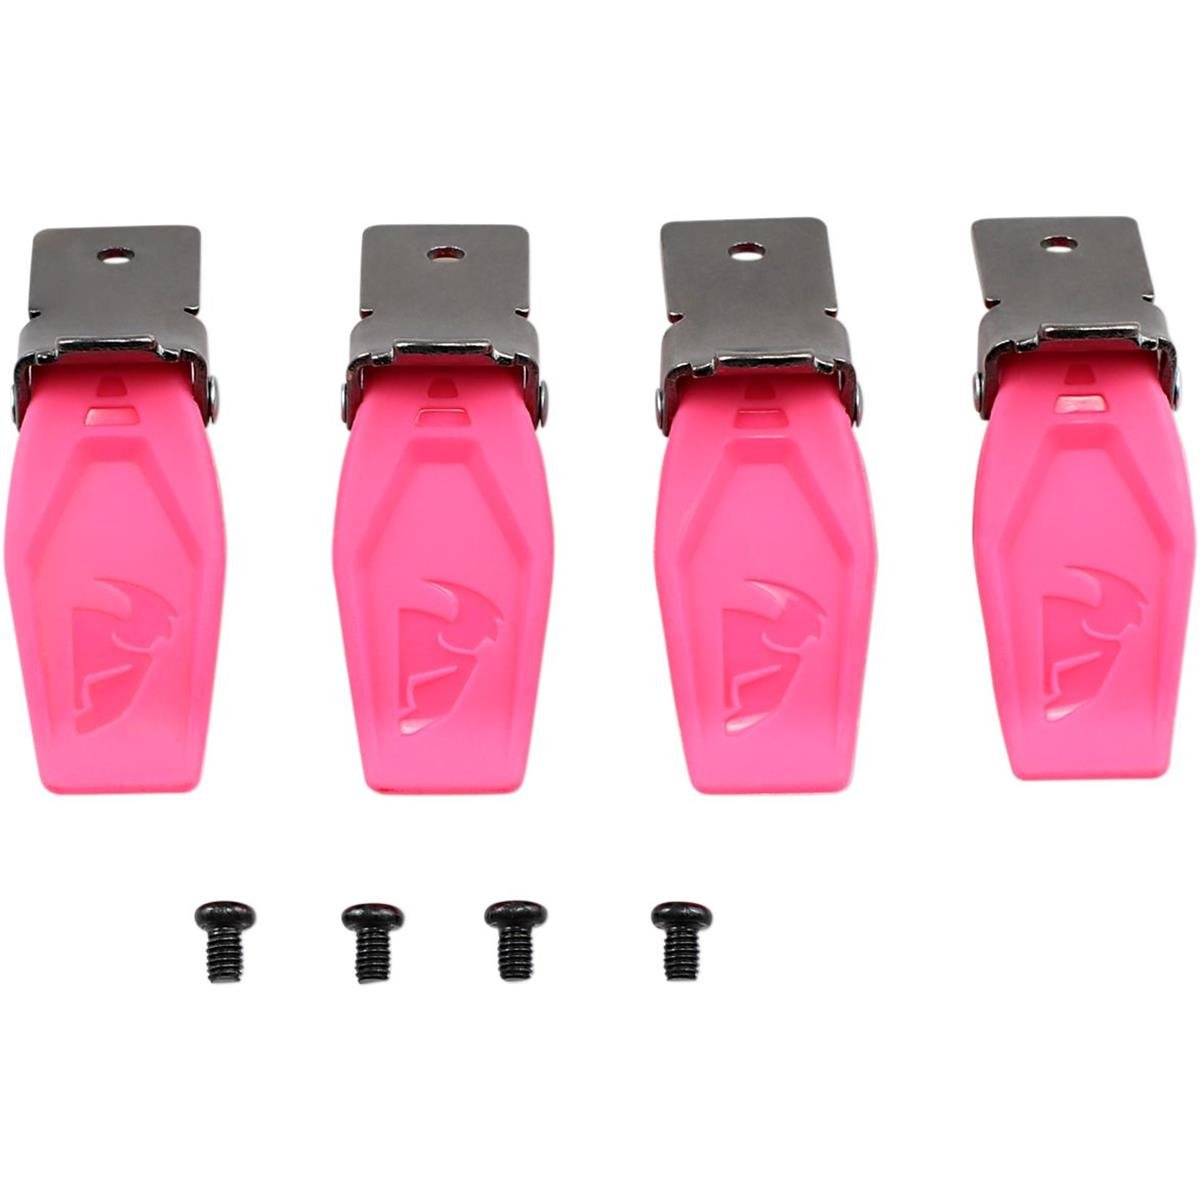 Thor Girls Replacement Buckle Kit Blitz XP Pink